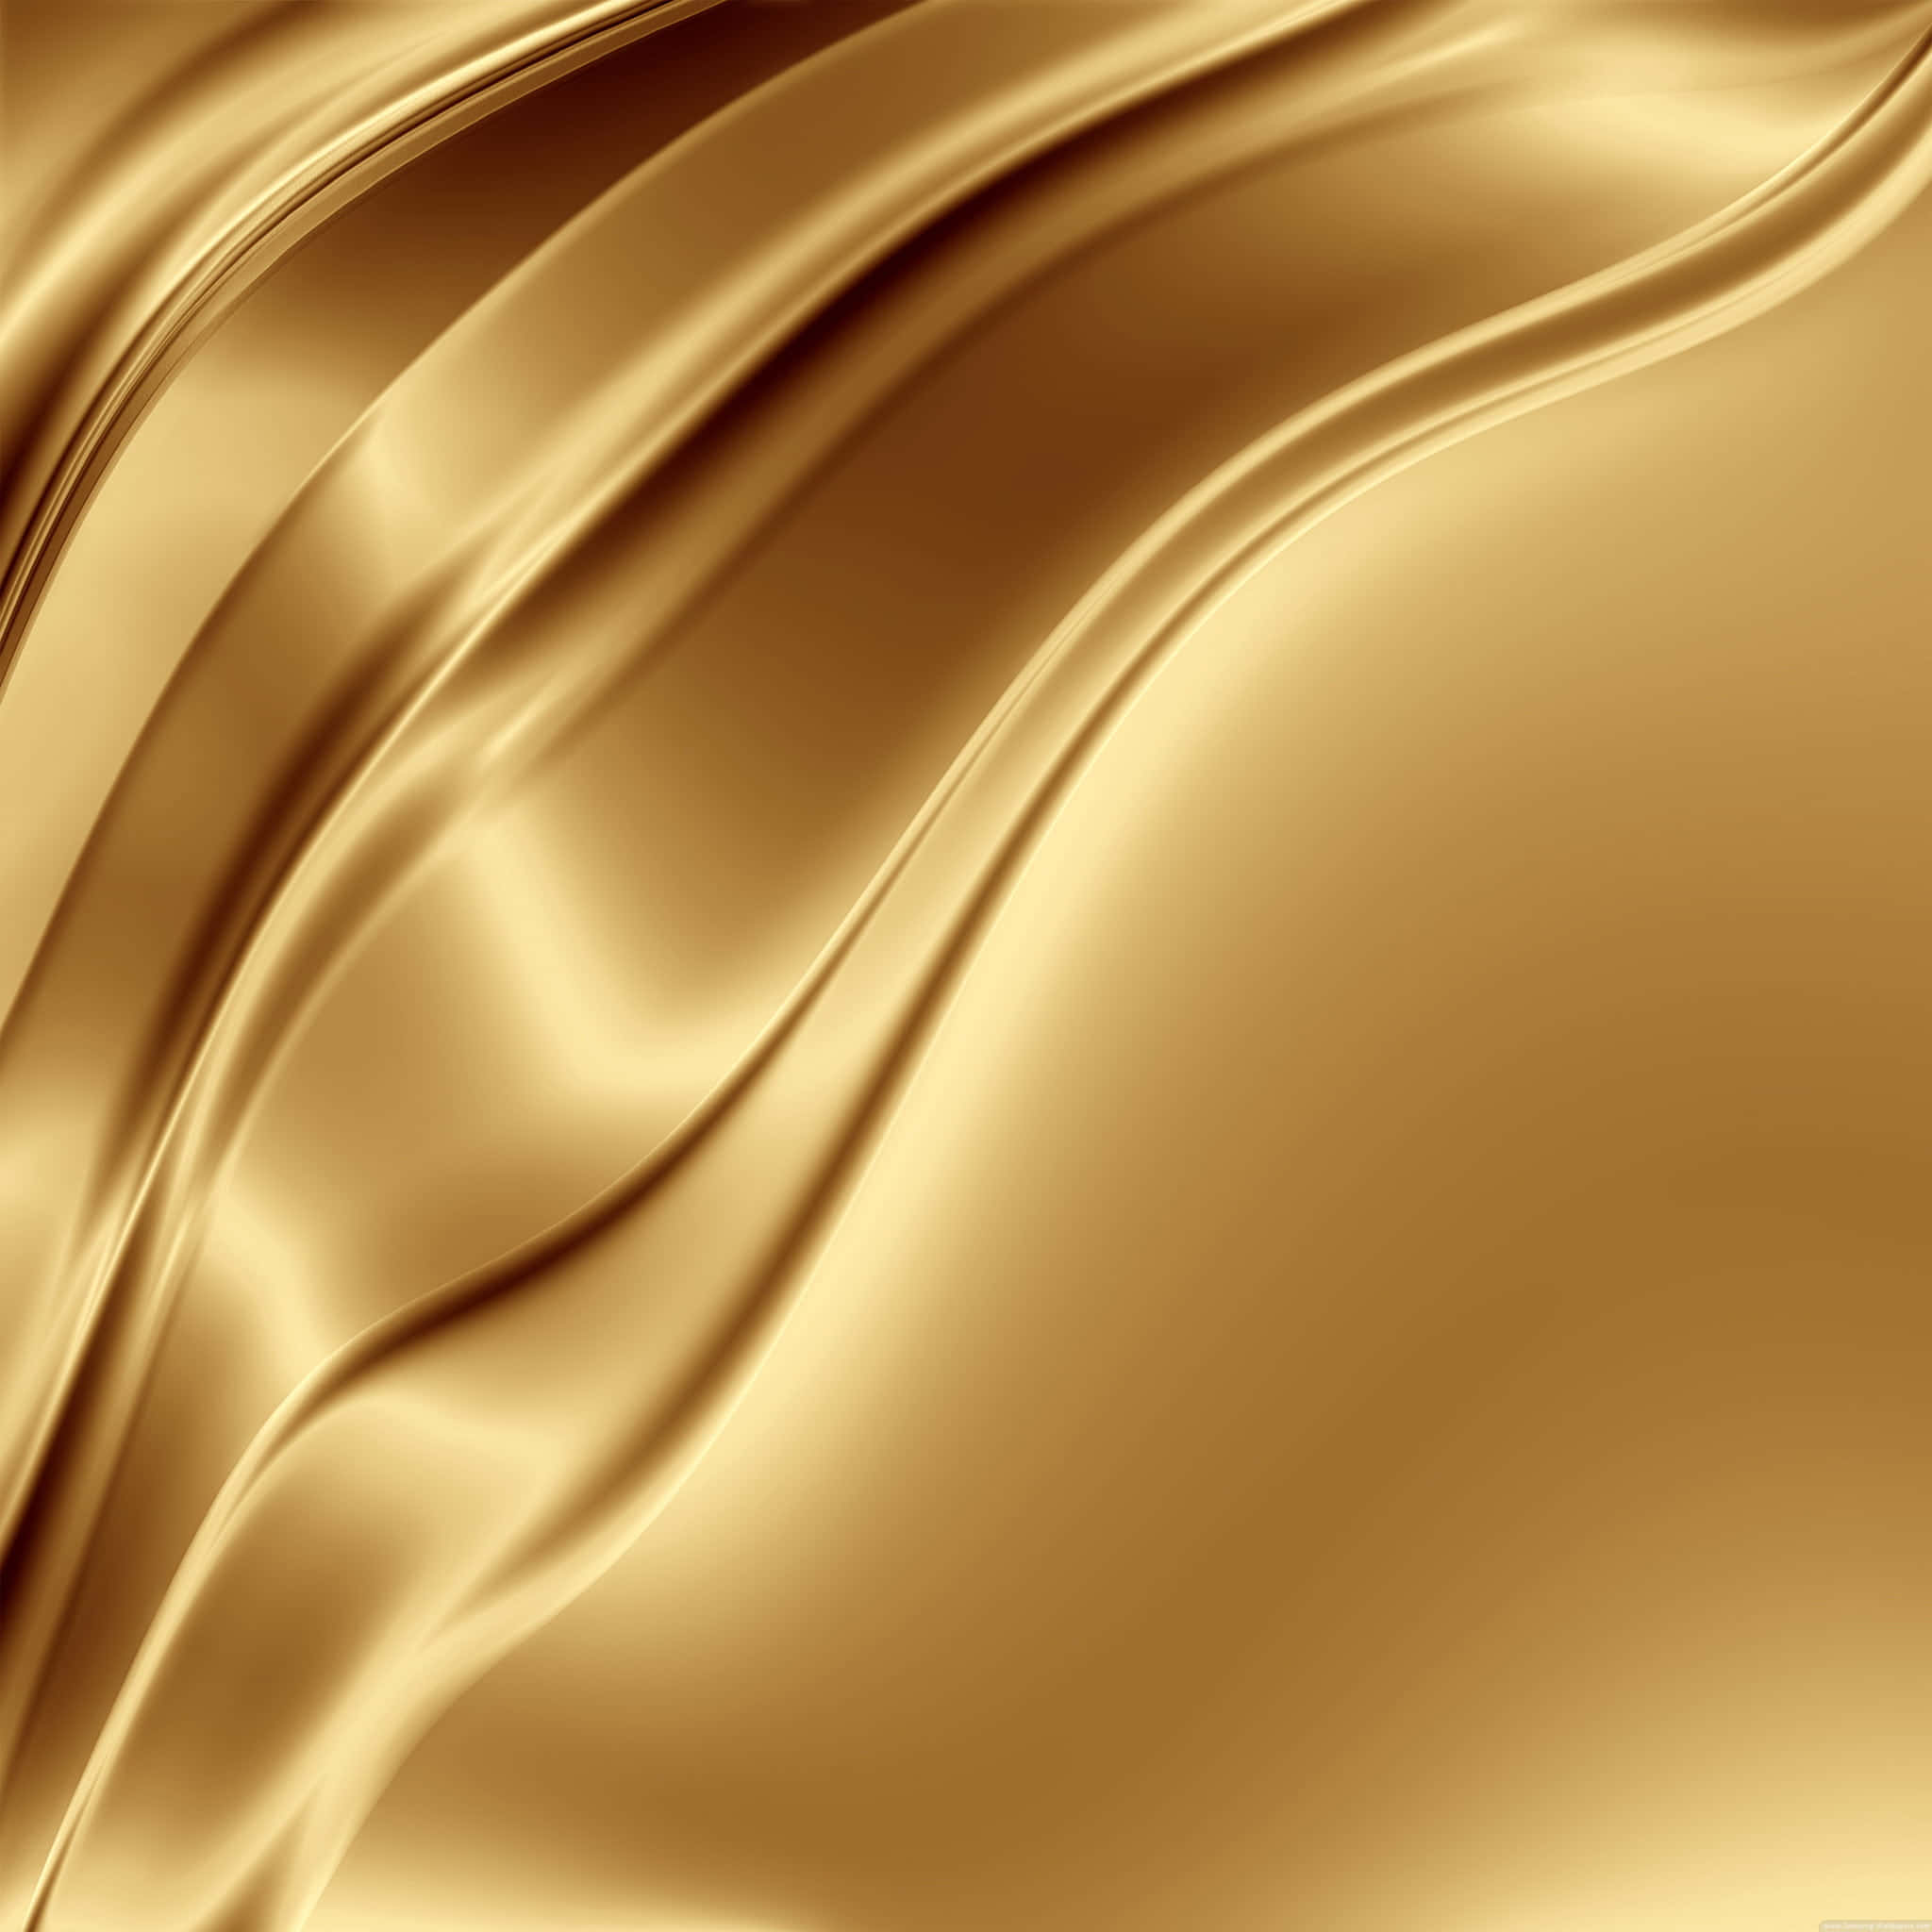 Gold Silk Background With Wavy Lines